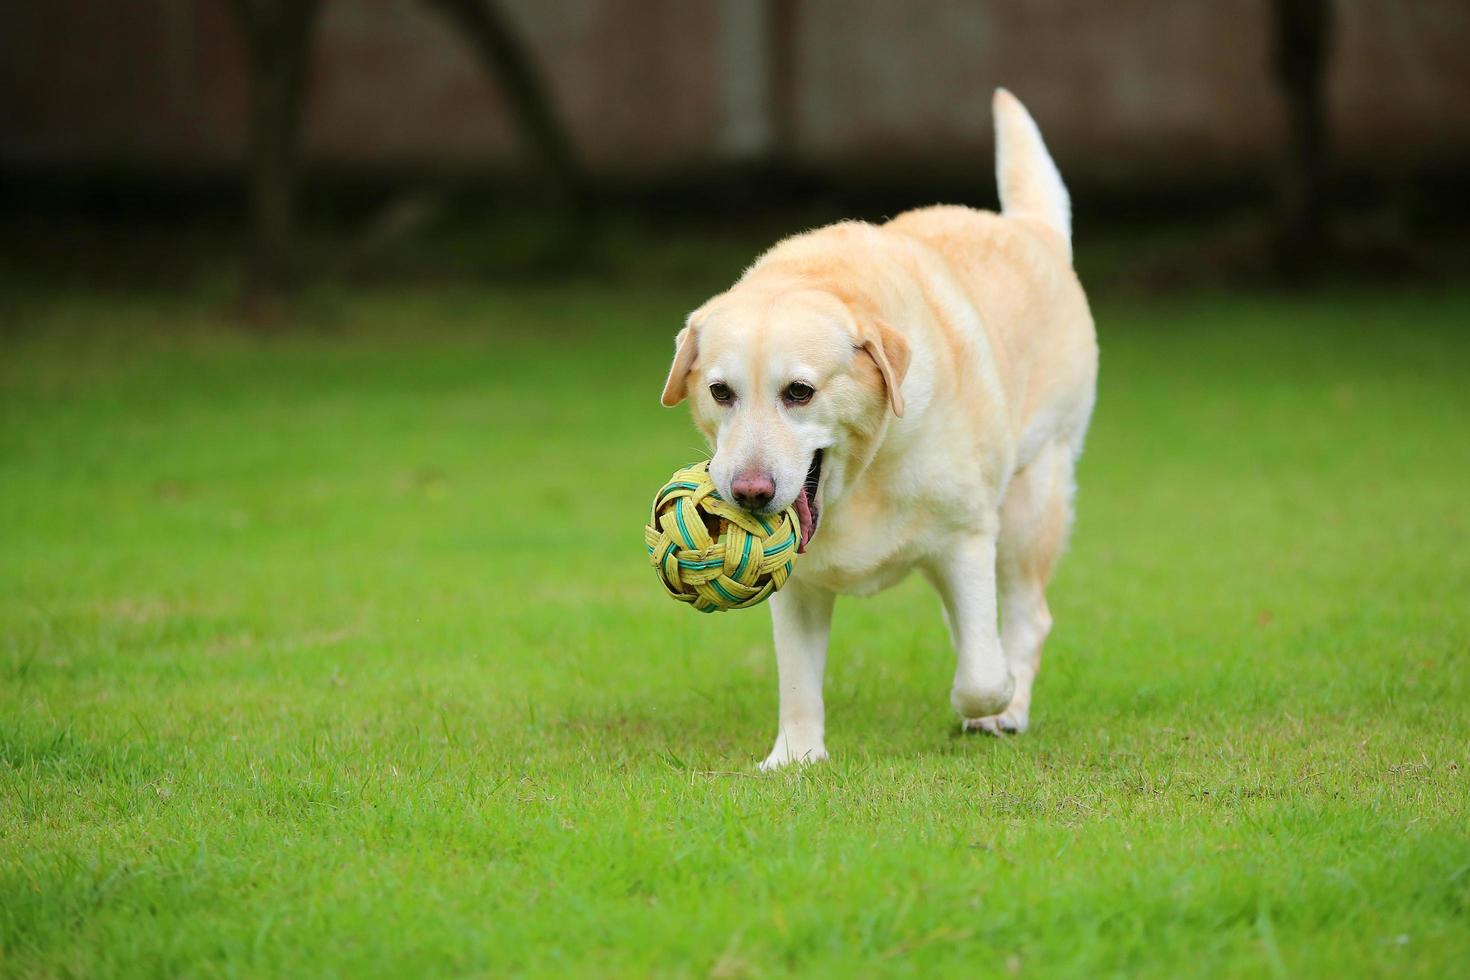 Labrador retriever hold ball in mouth and walking in the park. Dog playing with toy in grass field. photo